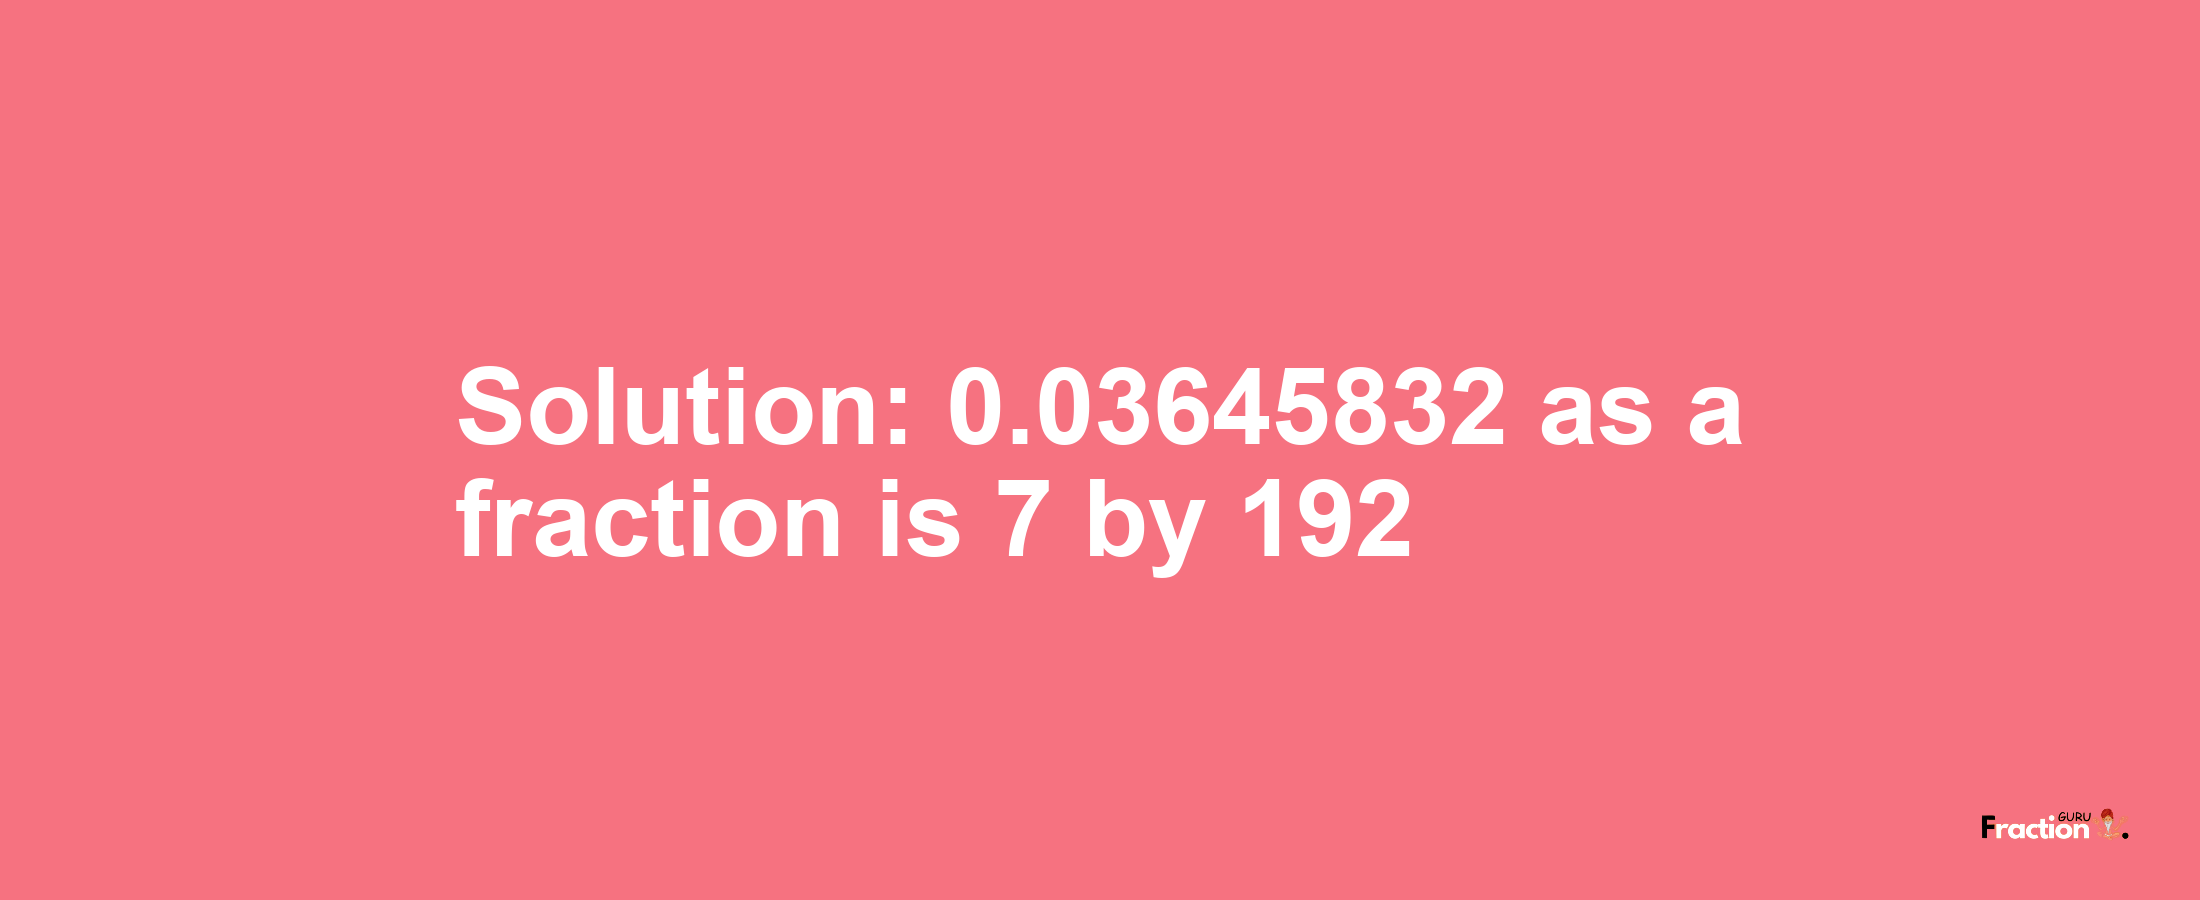 Solution:0.03645832 as a fraction is 7/192